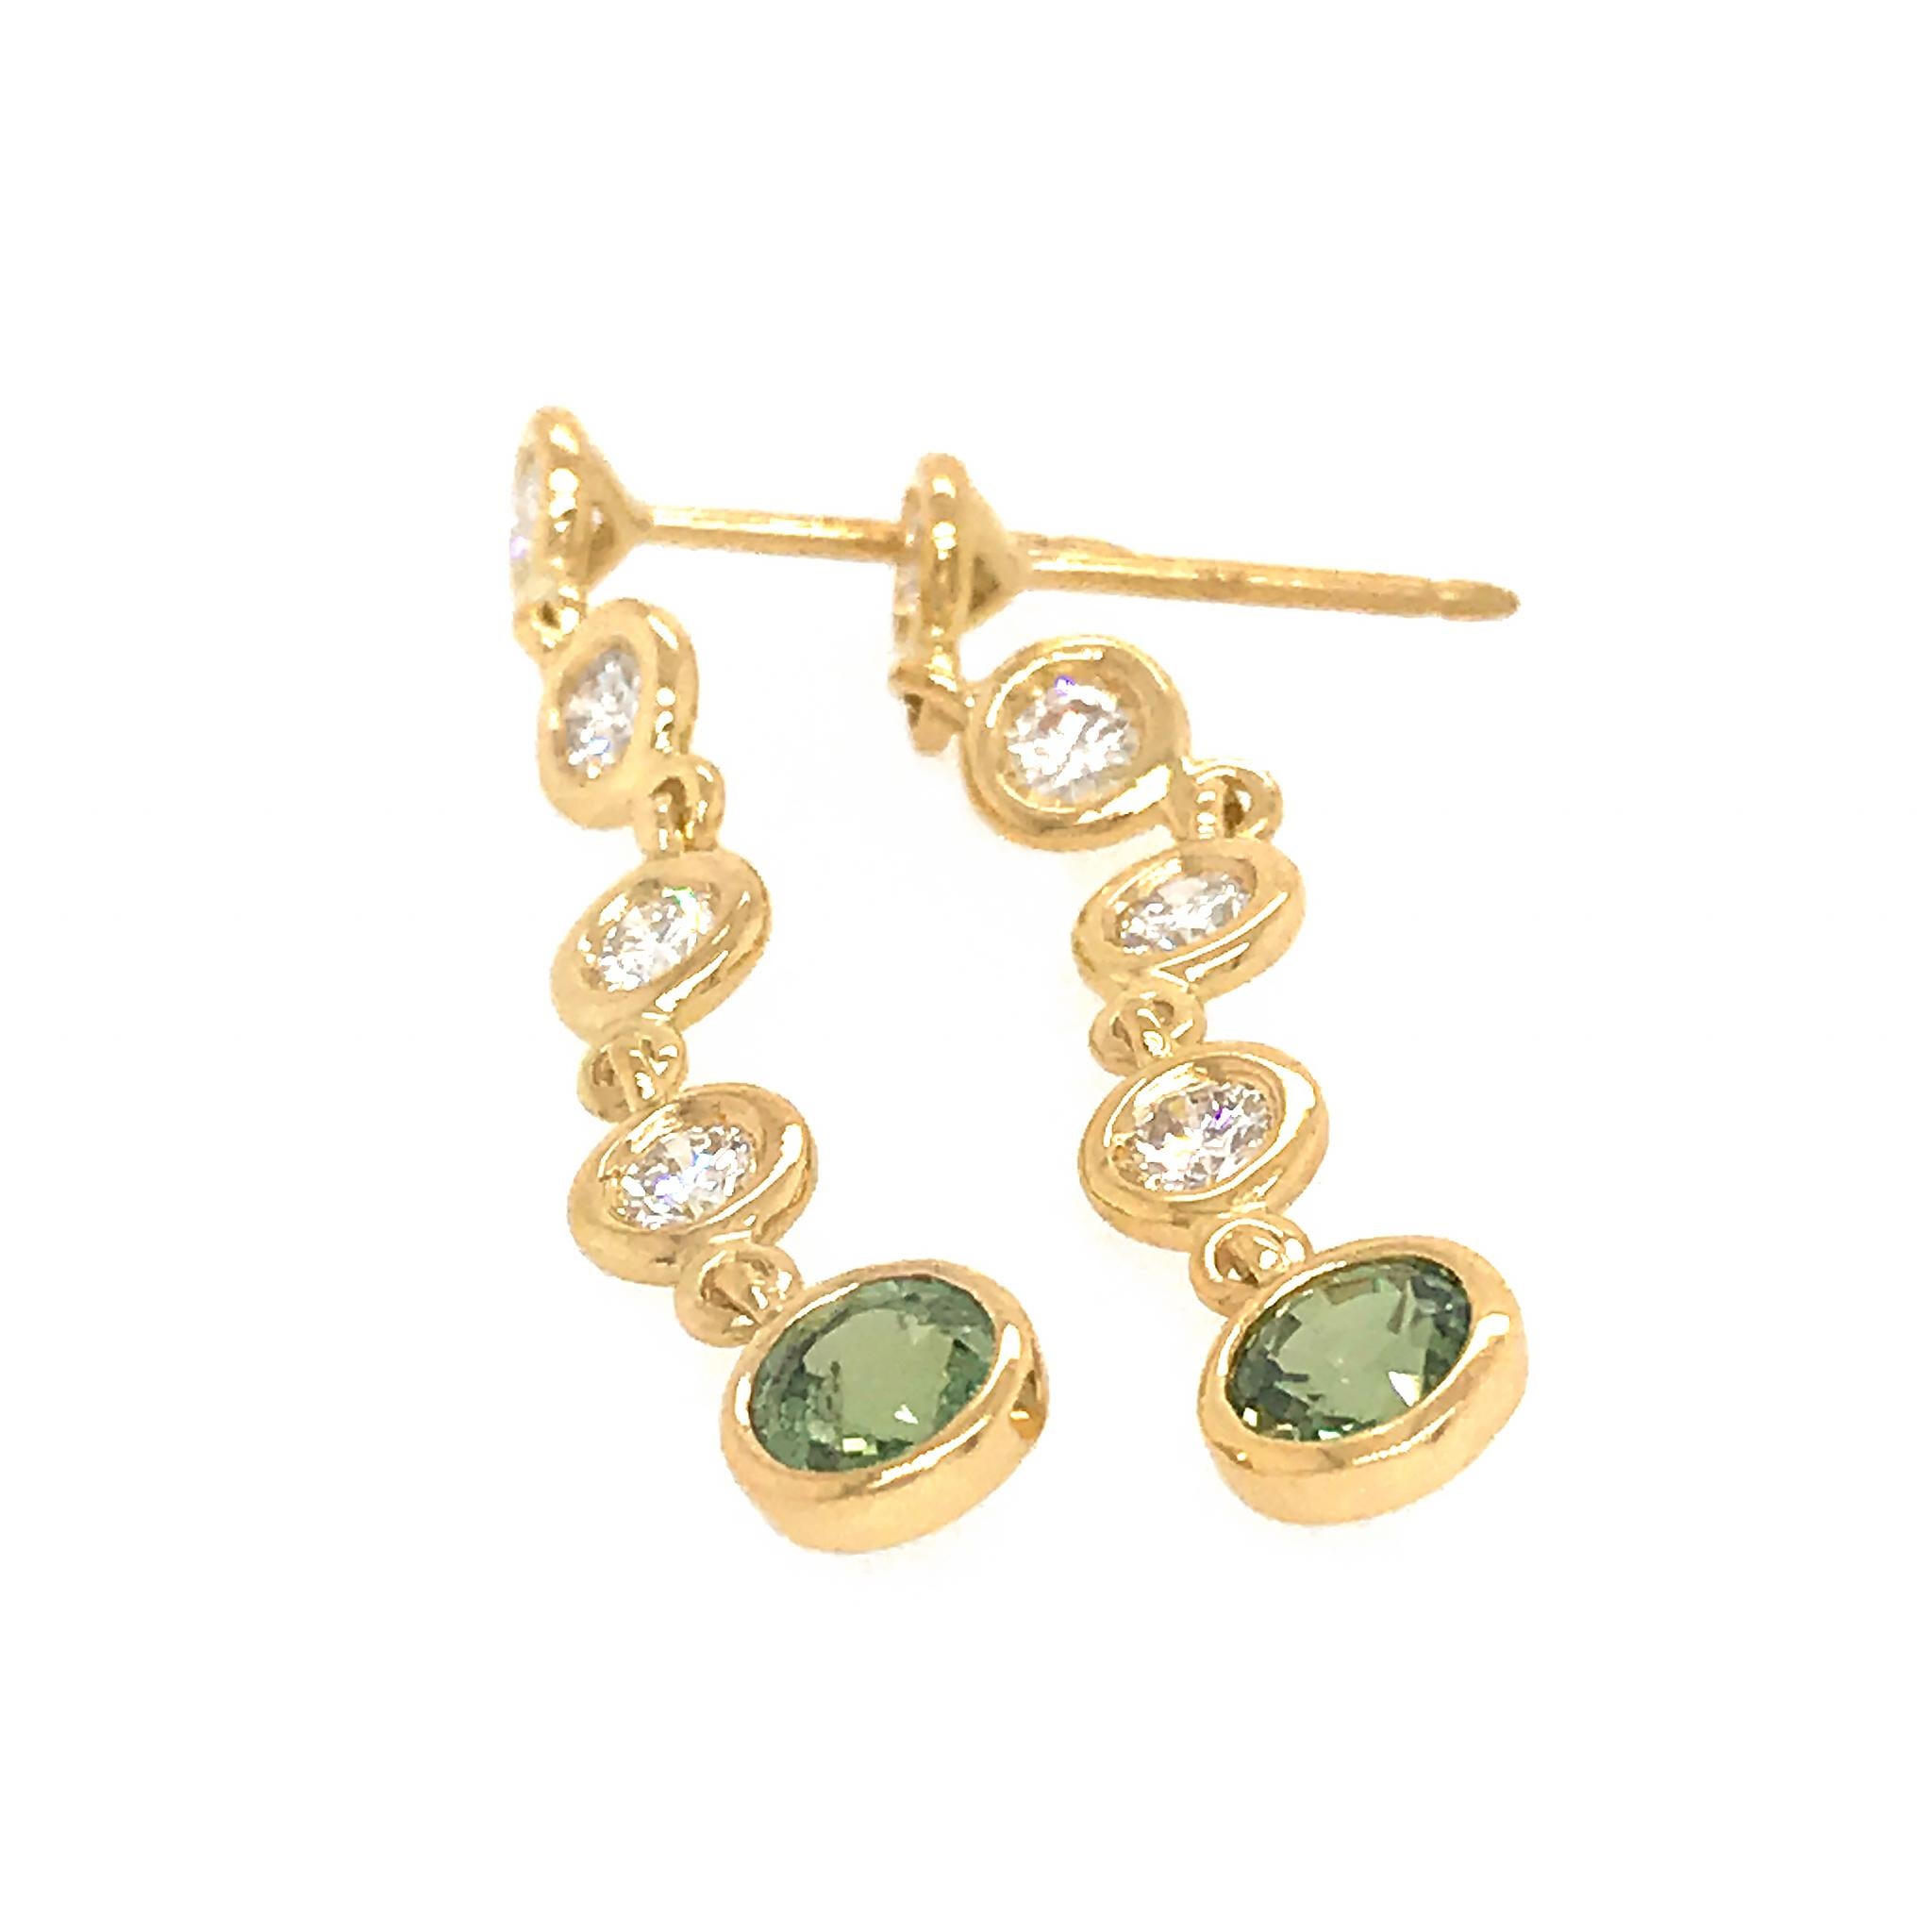 18K Yellow Gold
Diamond: 0.71 ct twd (Diamond)
Green Sapphire: 1.19 ct twd
Total Weight: 3.4 grams
Earrings Length: 1.5 inches